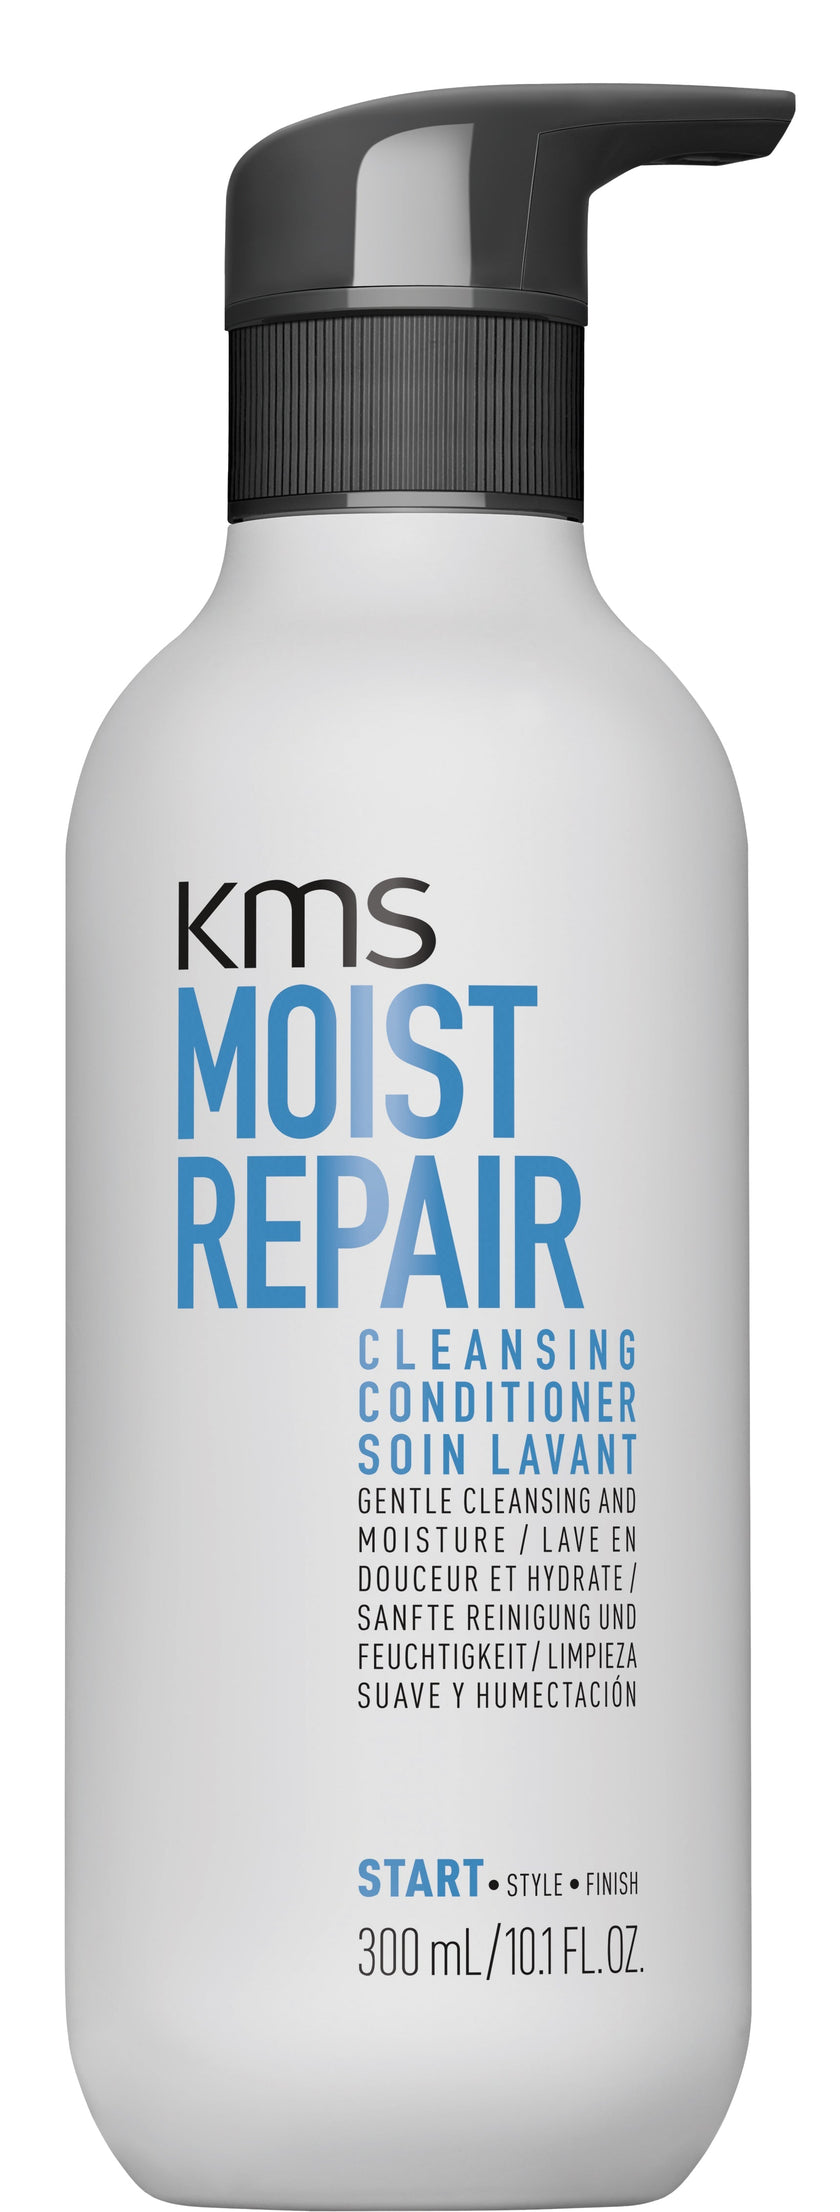 MoistRepair Cleansing Conditioner Image